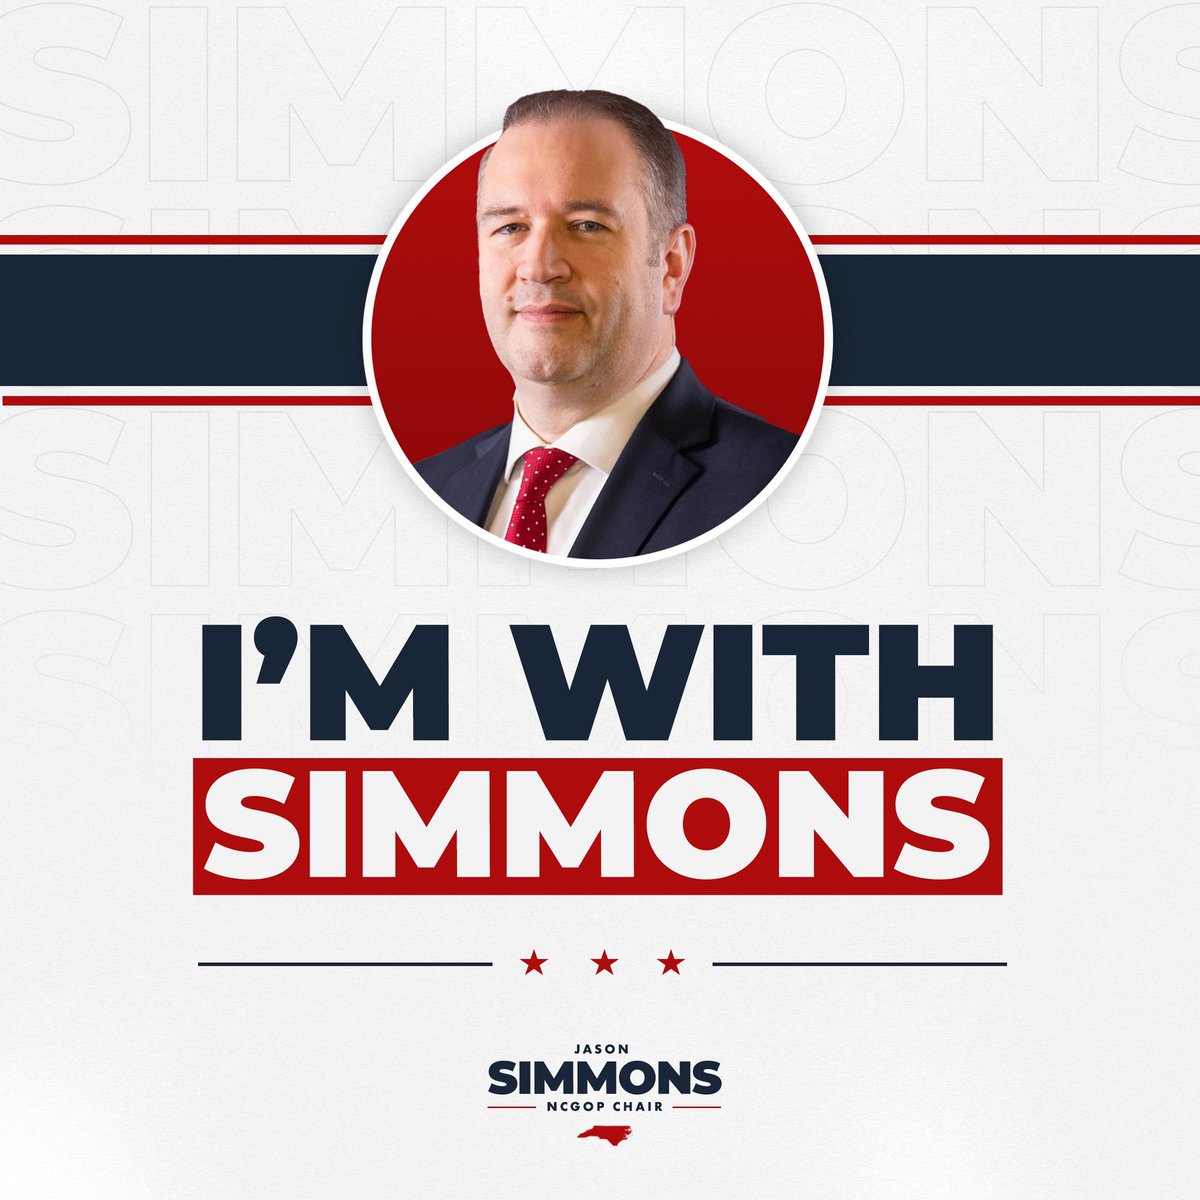 Jason Simmons is a leader. He’s put together the best staff in @NCGOP history and with them, has lead our party to victory time and time again. When you’re winning, you don’t change horses. Let’s finish the drill and win! #VoteSimmons @simmonsncgop